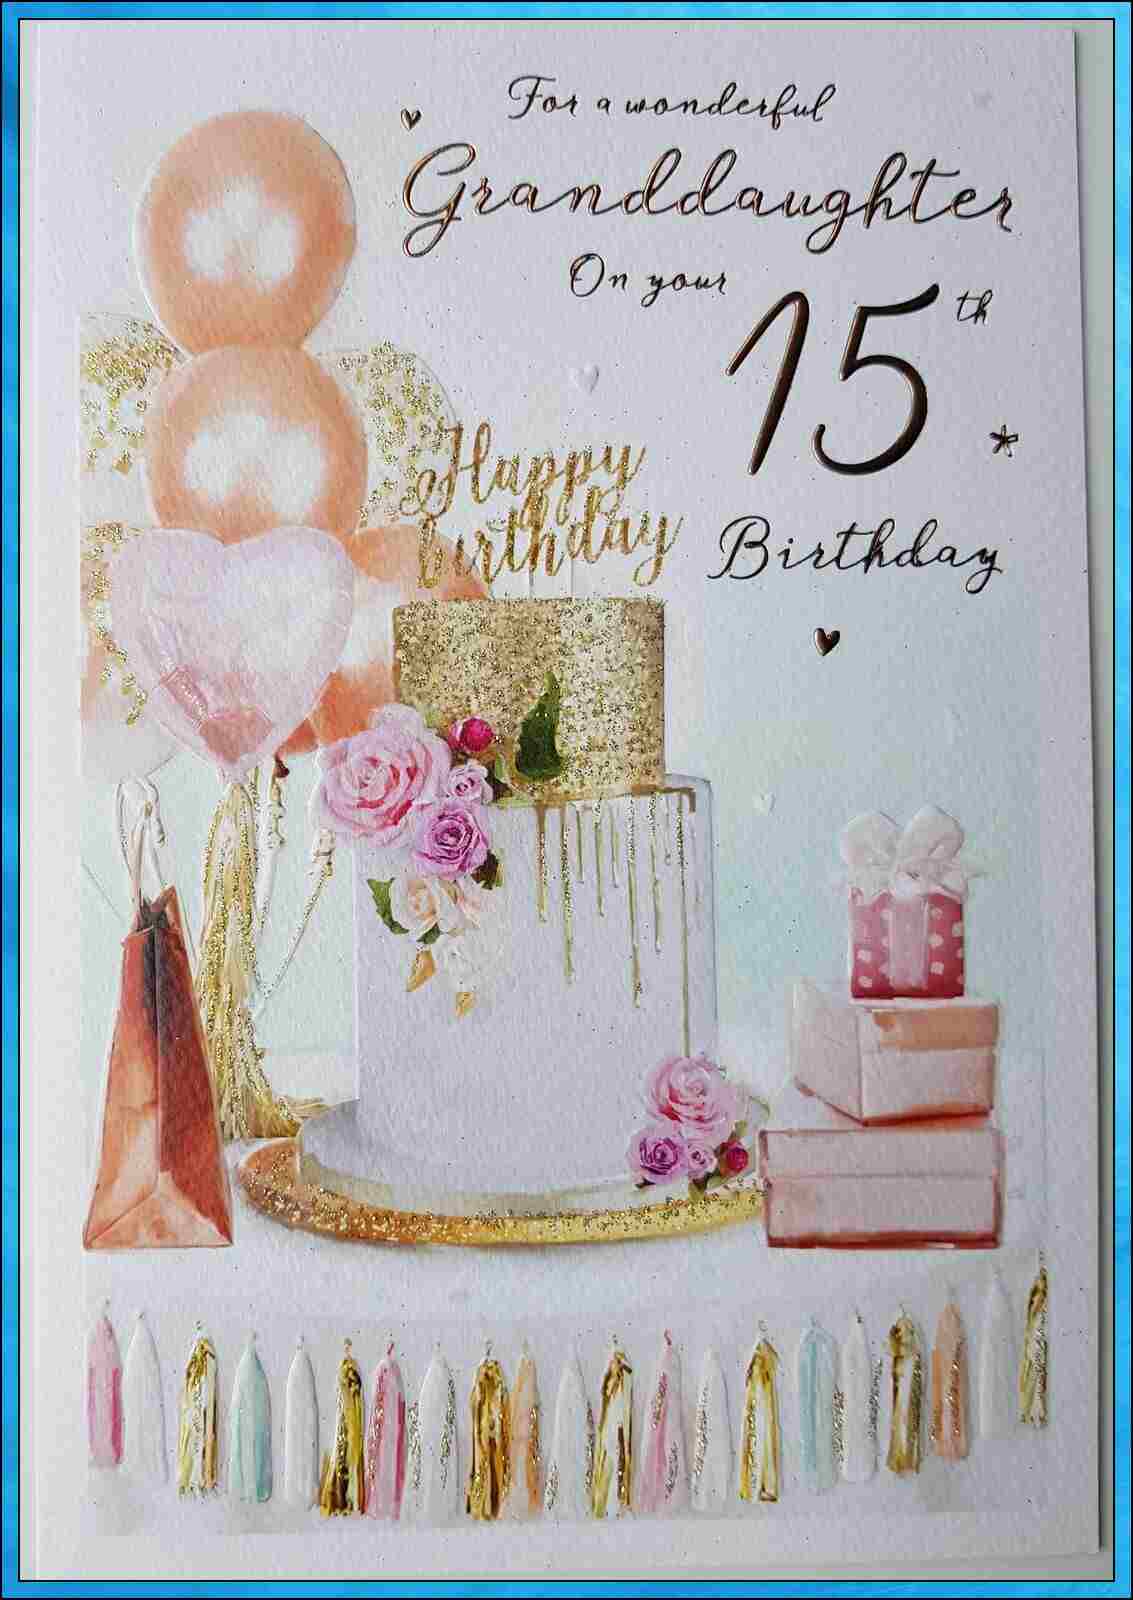 happy 15th birthday granddaughter images
